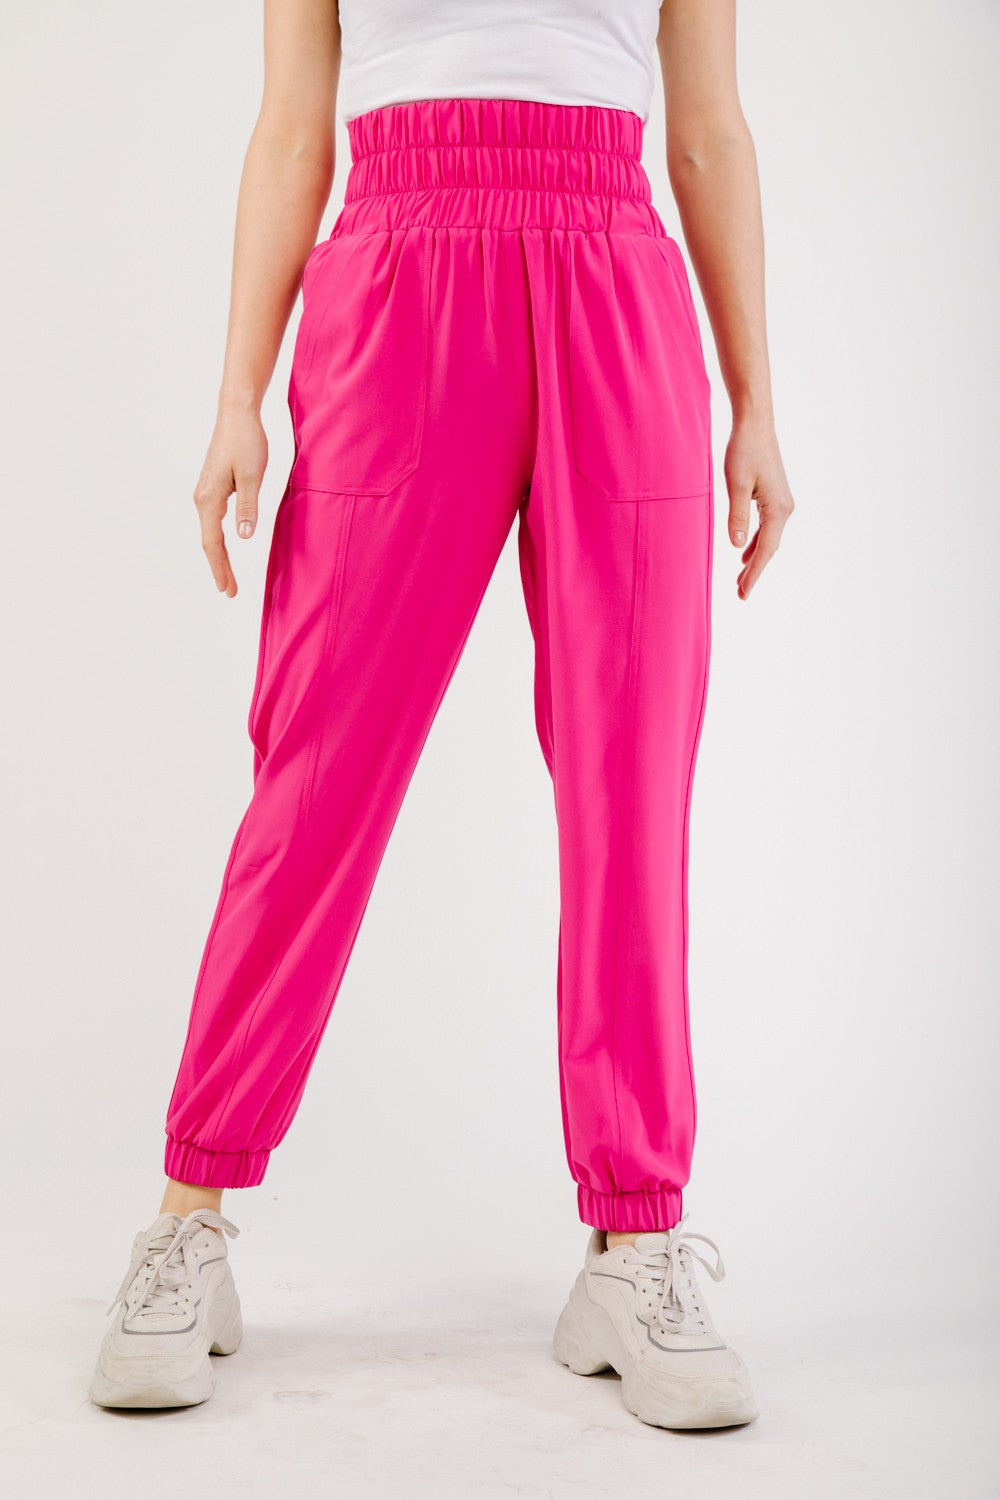 Womens bright pink high rise joggers